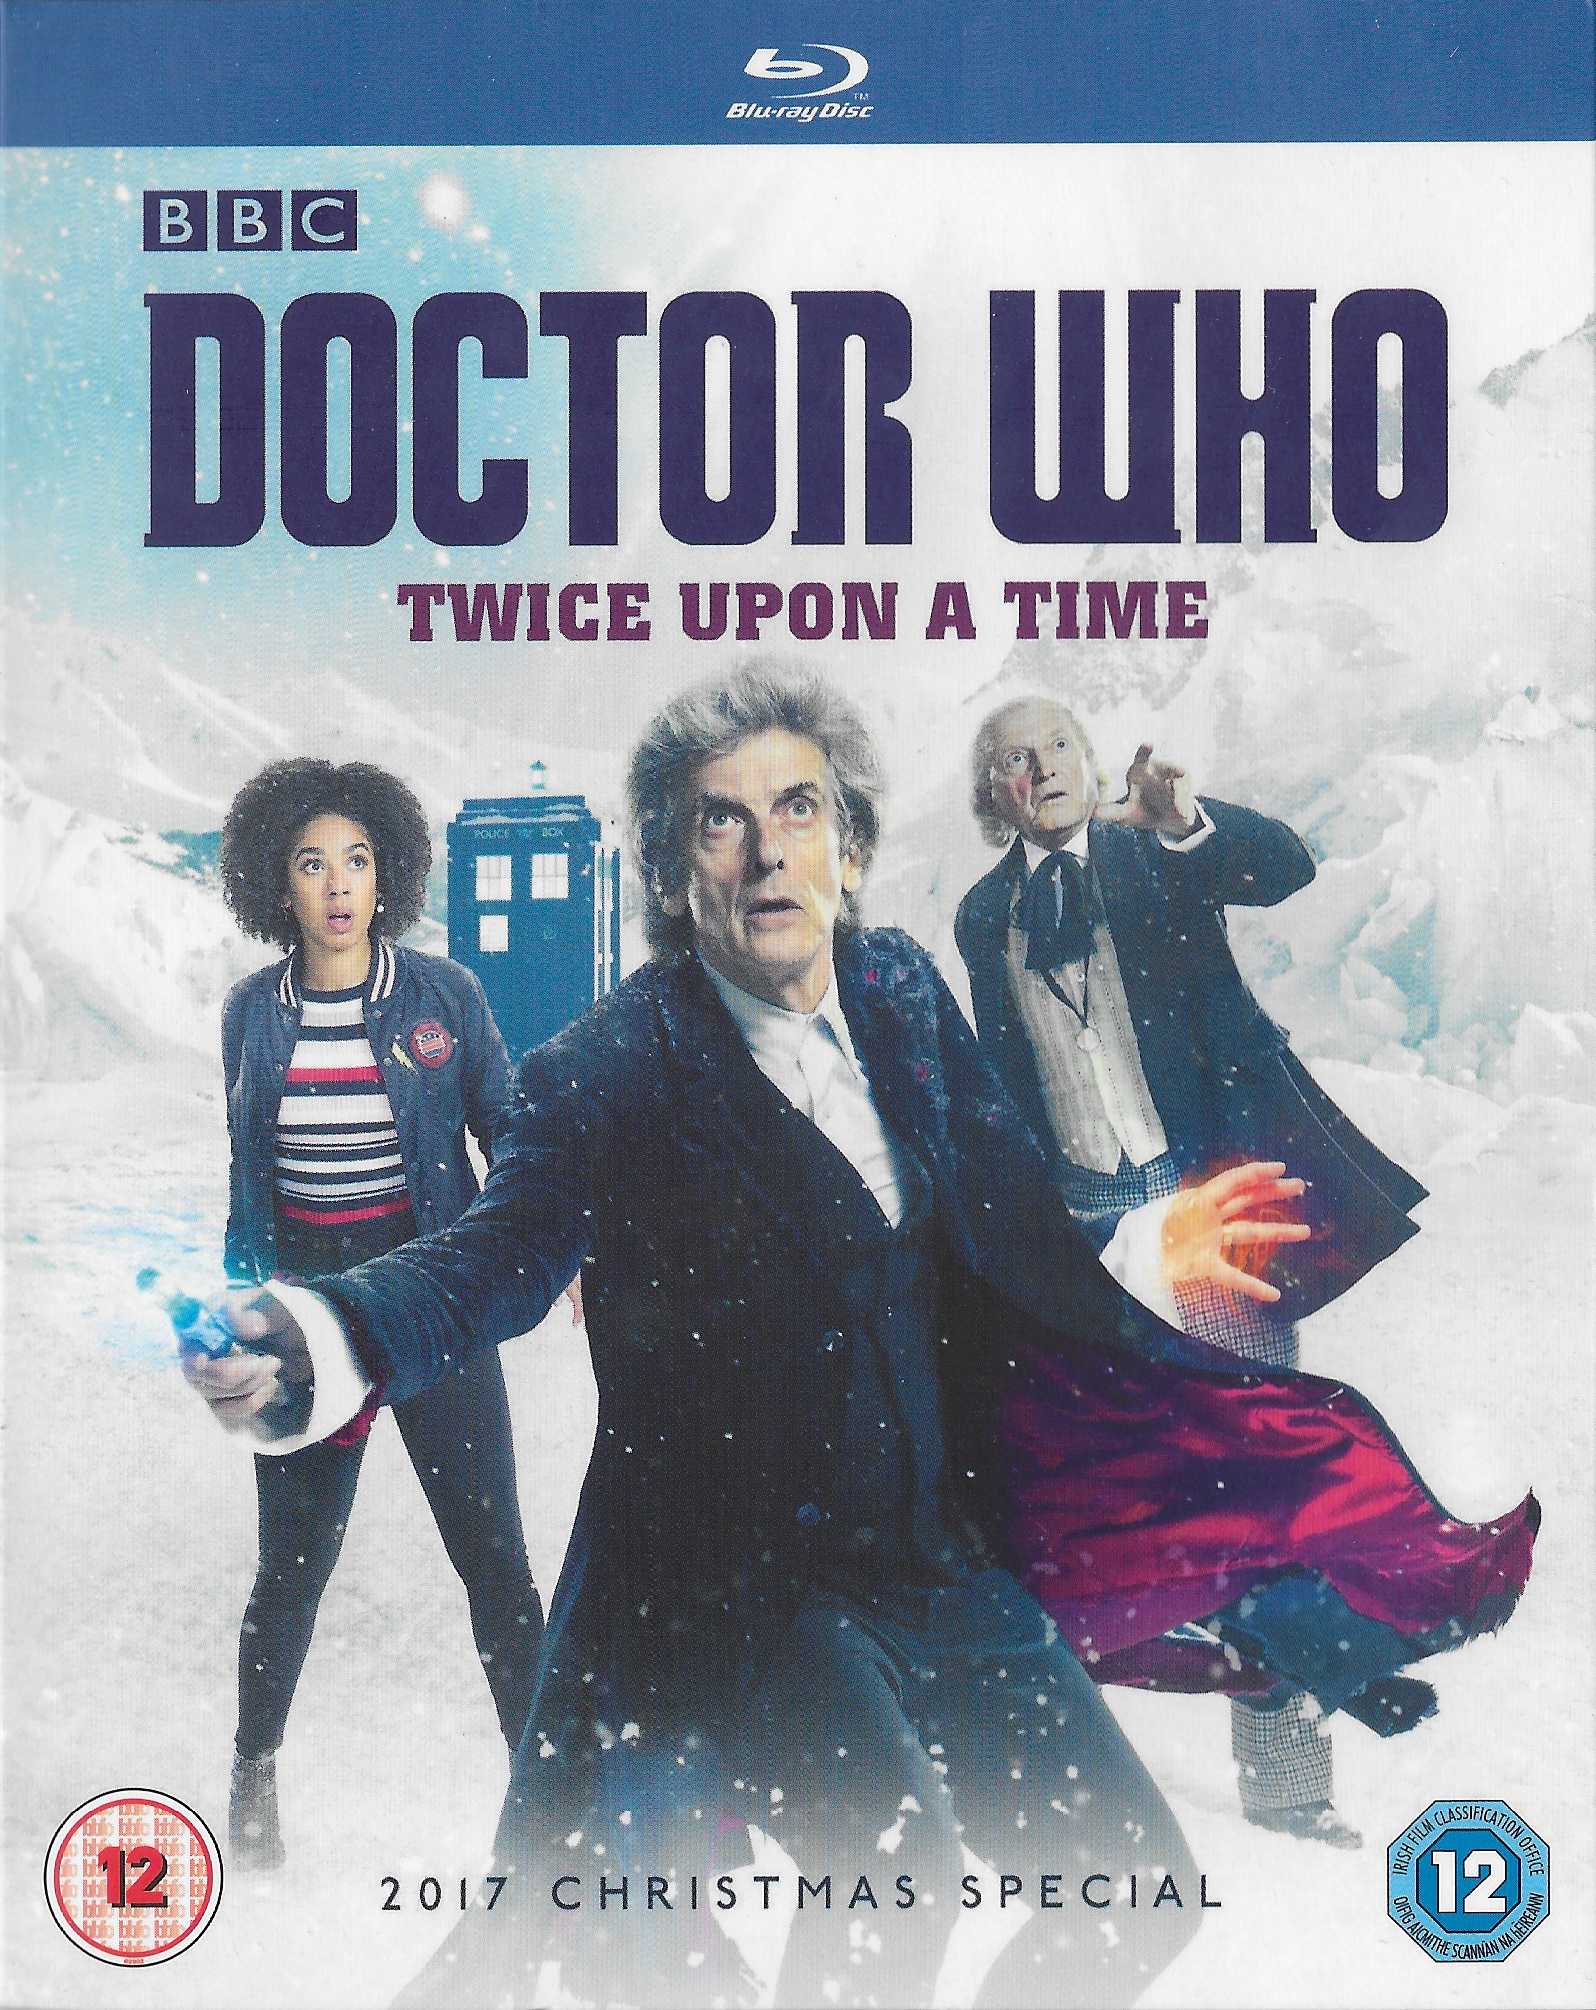 Picture of BBCBD 0423 Doctor Who - Twice upon a time blu-ray by artist Steven Moffat from the BBC records and Tapes library